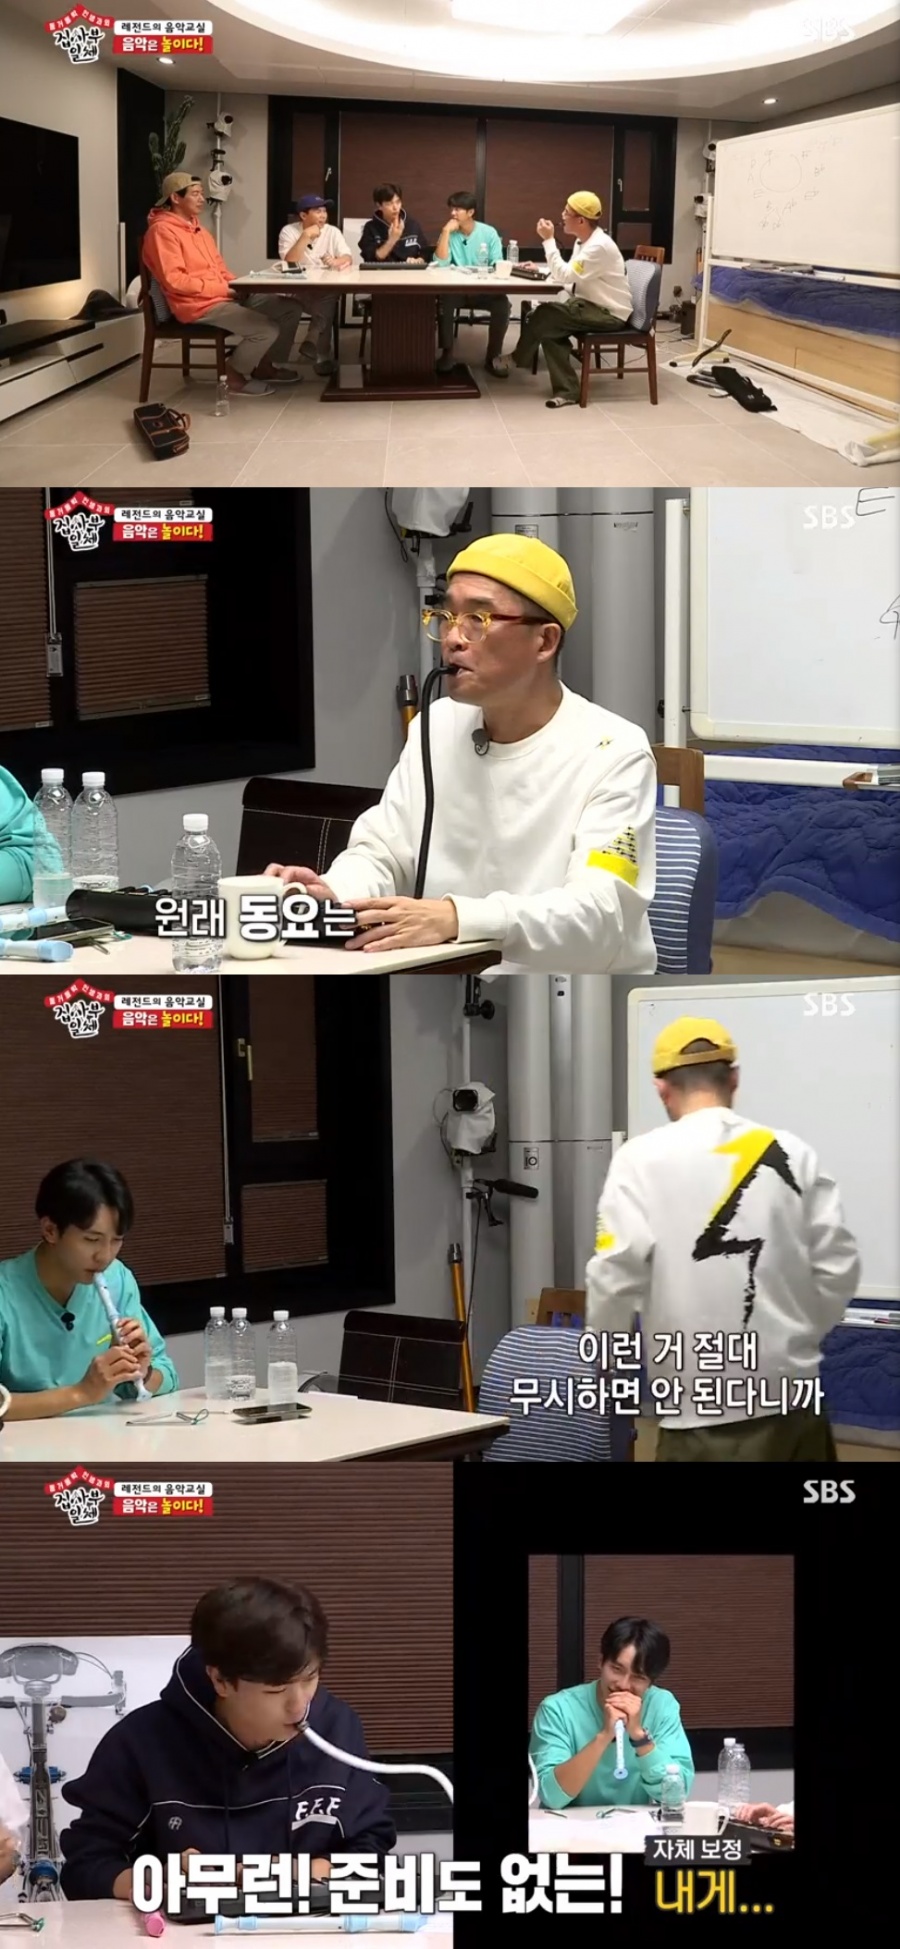 SBS All The Butlers Lee Seung-gi has been enthusiastic about Kim Gun-mo excuse.Kim Gun-mo held a music class on SBS All The Butlers broadcast on the 10th.Kim Gun-mo opened a classroom to teach music; the way Kim Gun-mo passed on was to use Melodica.Kim Gun-mo, who has taken out from Melodica to the triangle, said, I want to deal with one instrument.Kim Gun-mo, who played the hit song Excuse with Melodica, wrote the name of the system directly on the blackboard, and Yoo Sung-jae, Lee Seung-gi, Lee Sang-yoon and Yang Se-hyeong practiced for their respective parts.However, Lee Seung-gi, who suddenly played vocals with a high key, was embarrassed, but in the concert that started, he showed off his singing ability and got Kim Gun-mos OK sign.=